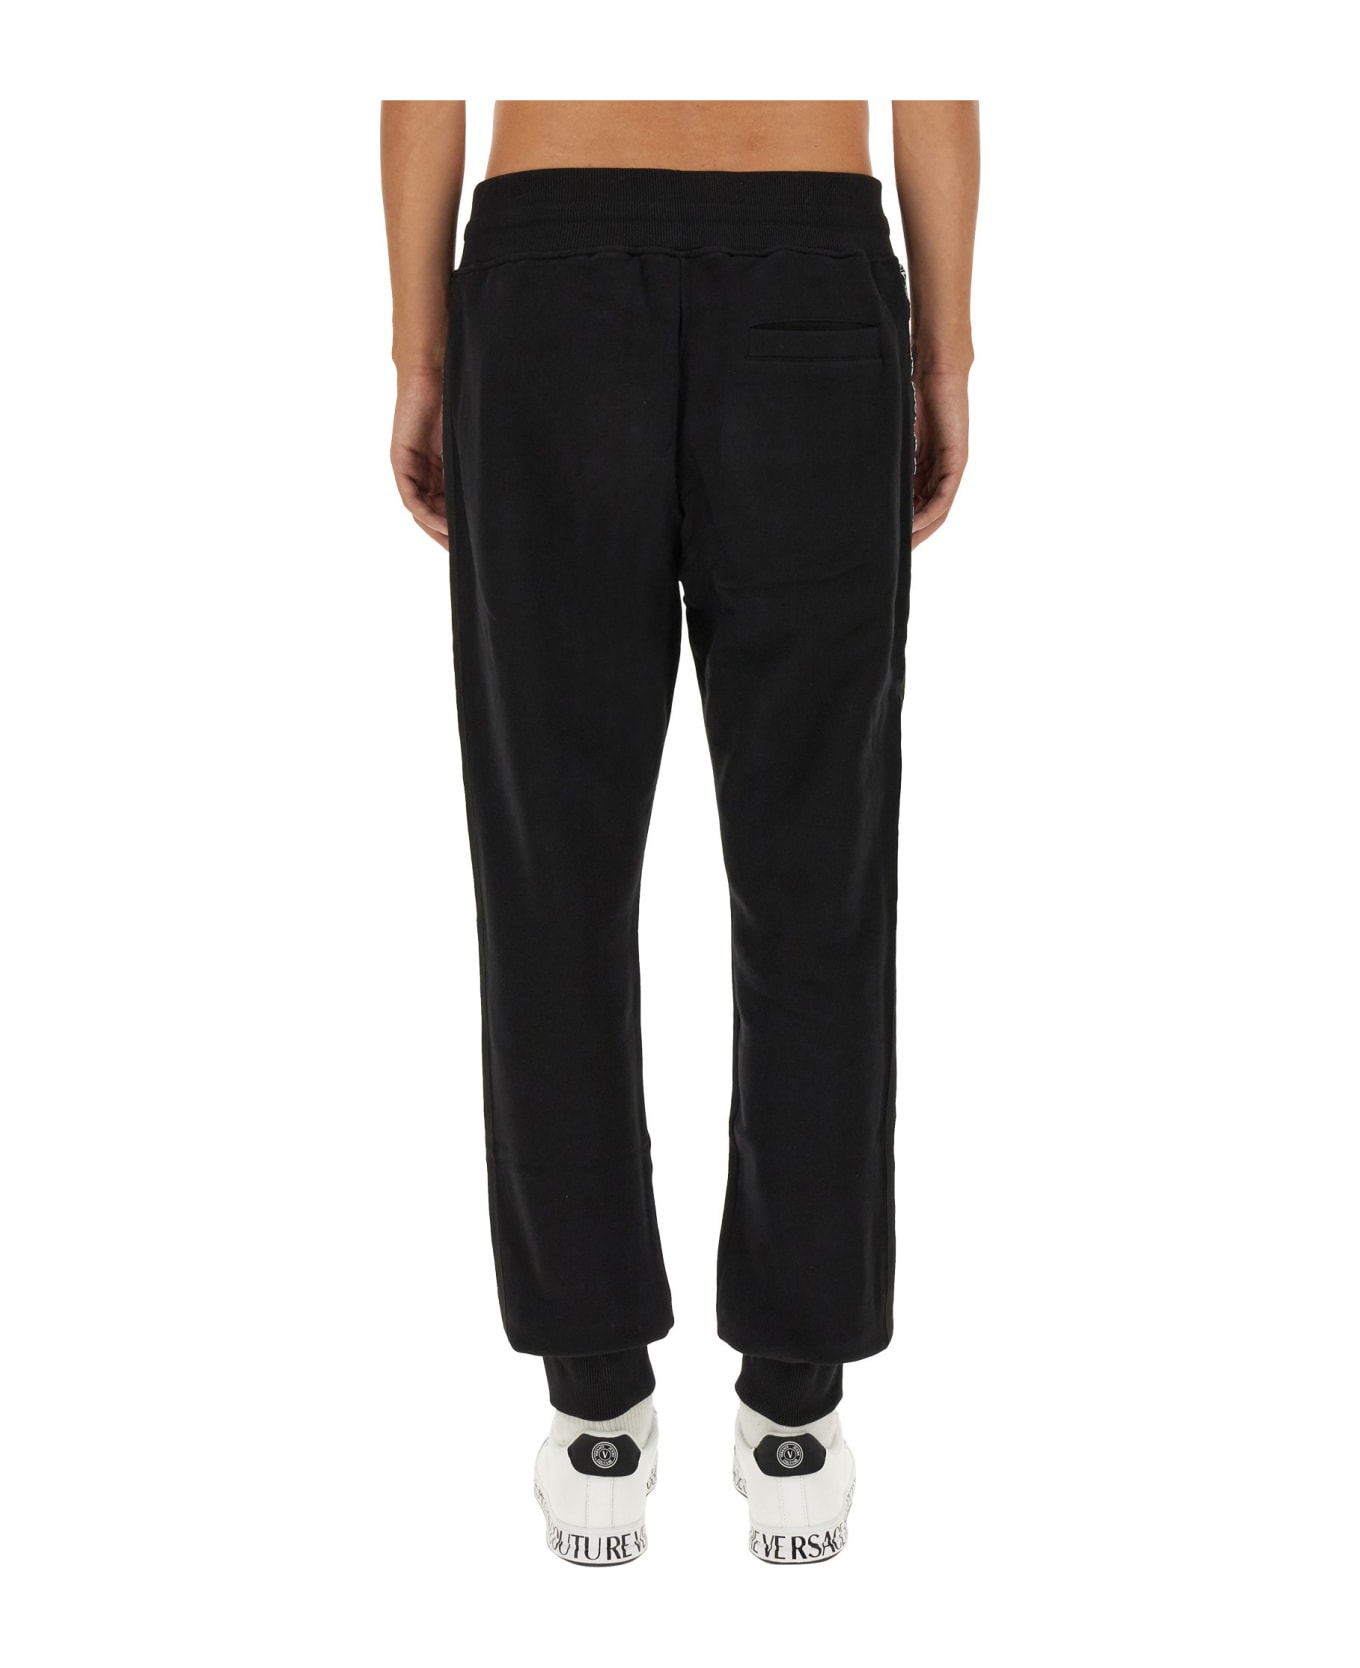 Versace Jeans Couture Sweatpants With Branded Side Stripes - NERO